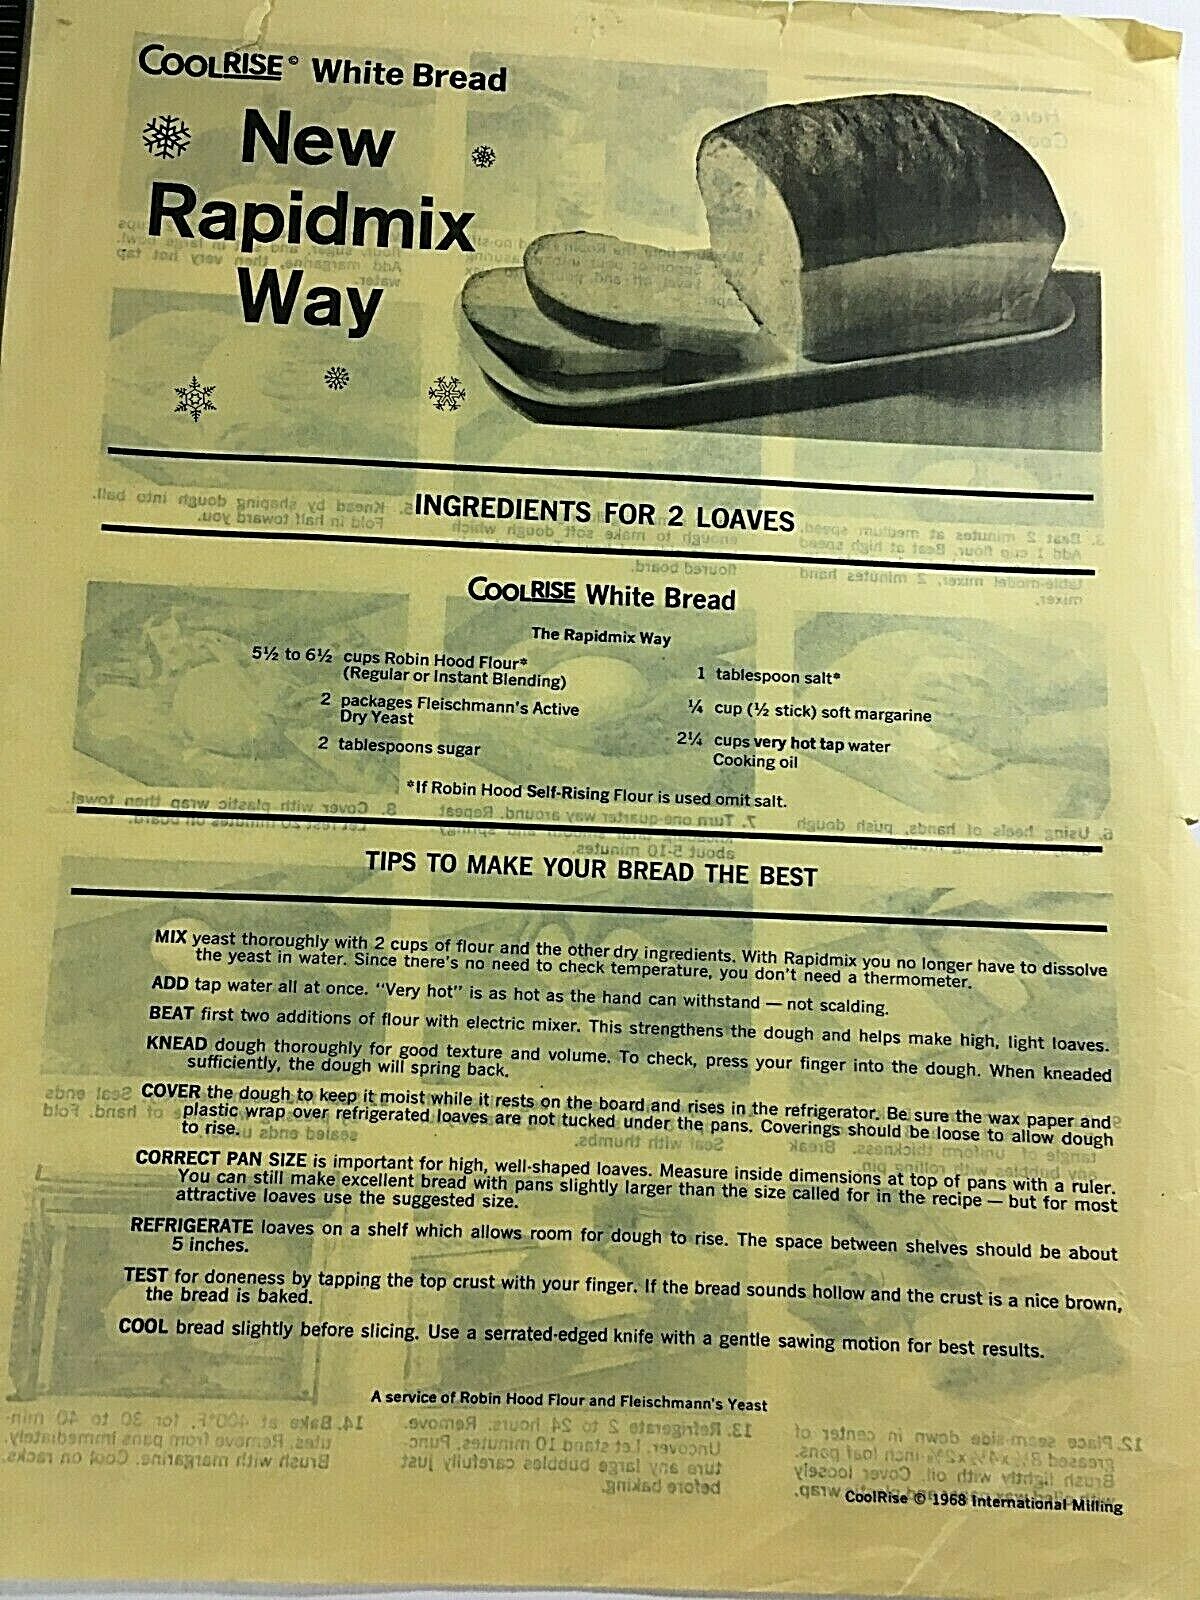 Vintage 1968 Coolrise White Bread New Rapidmix Way instructions Int\'l Milling